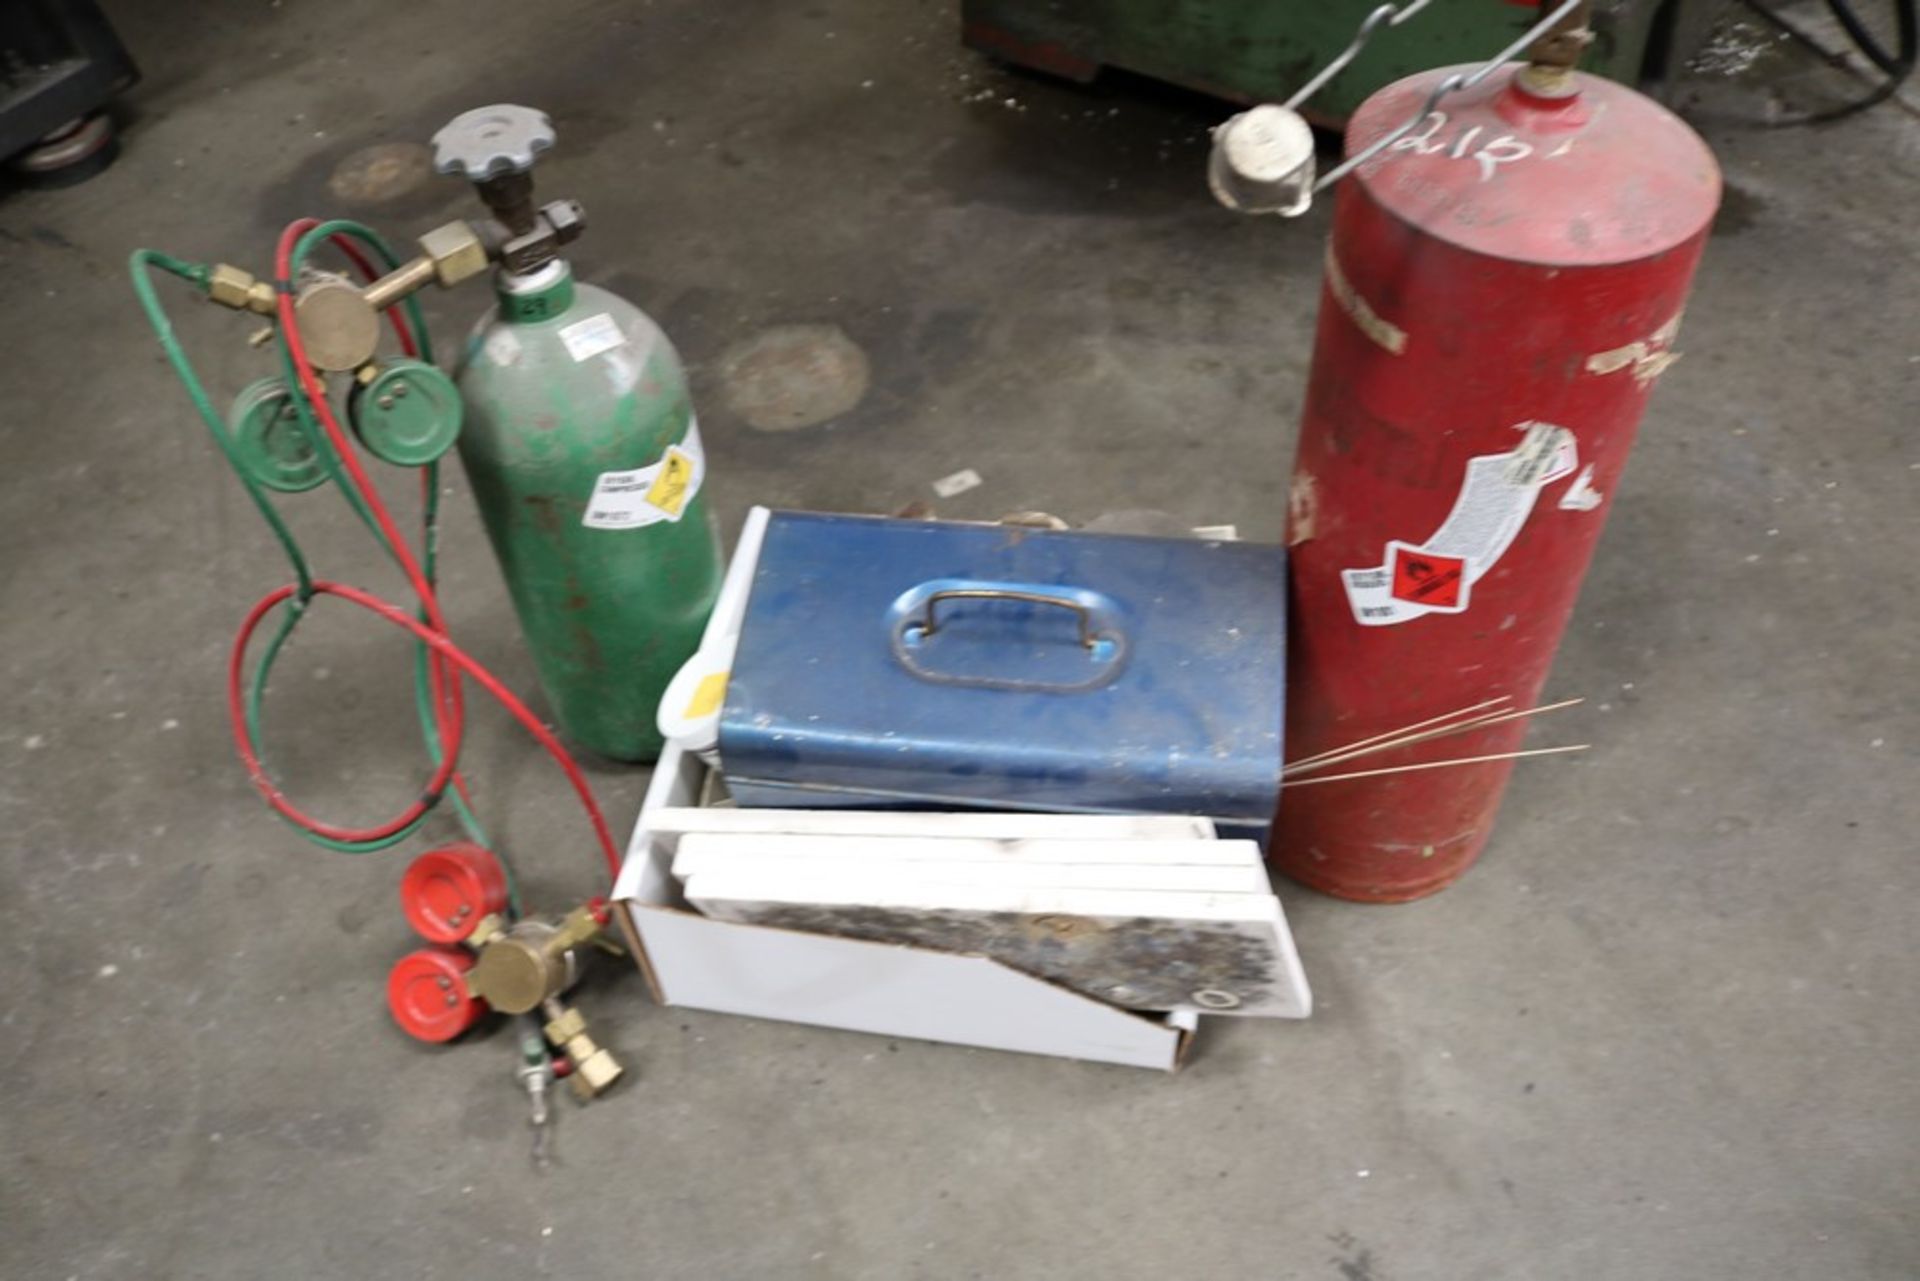 Heavy Duty Soder Unit with Compounds, Consumables, Acetylene and Oxygen Canister with Gages